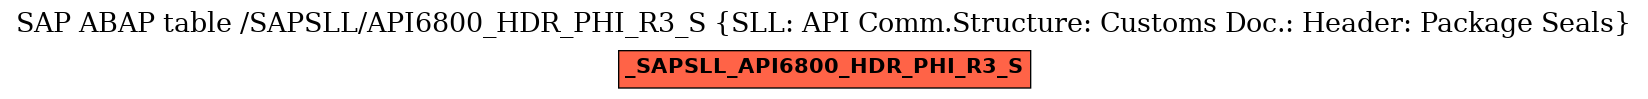 E-R Diagram for table /SAPSLL/API6800_HDR_PHI_R3_S (SLL: API Comm.Structure: Customs Doc.: Header: Package Seals)